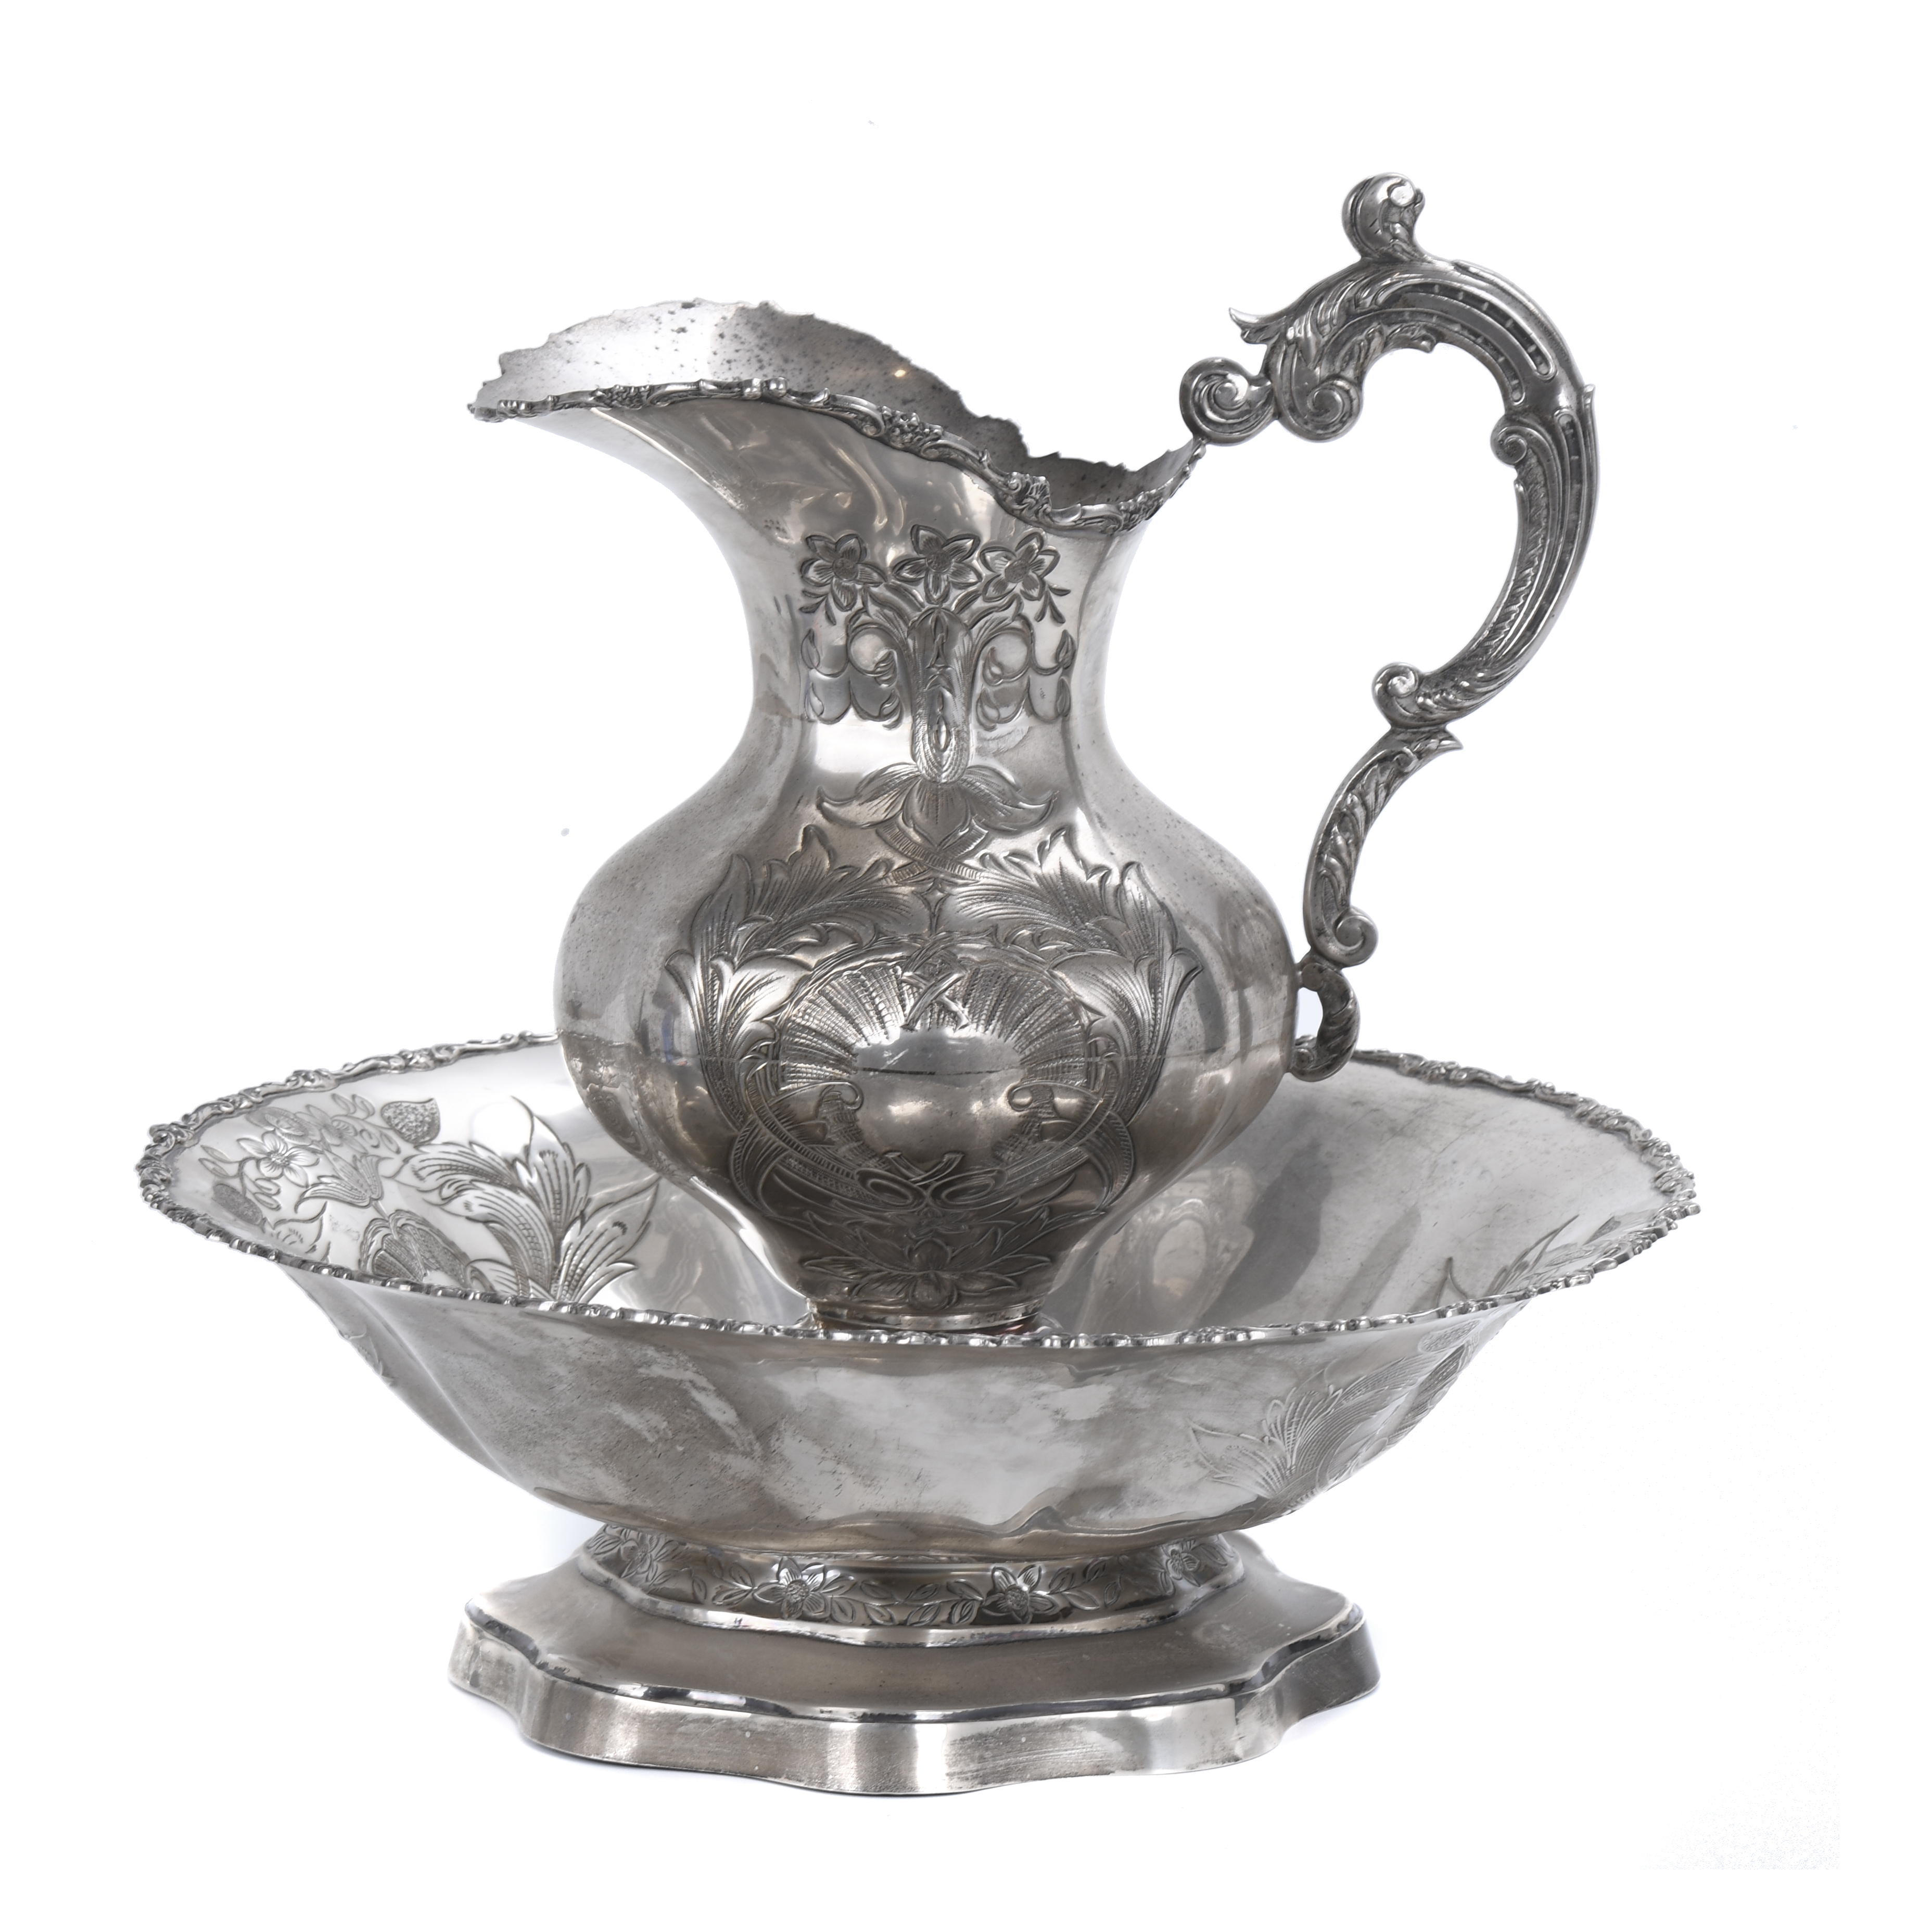 SPANISH JUG AND BASIN IN SILVER, MID 20TH CENTURY.